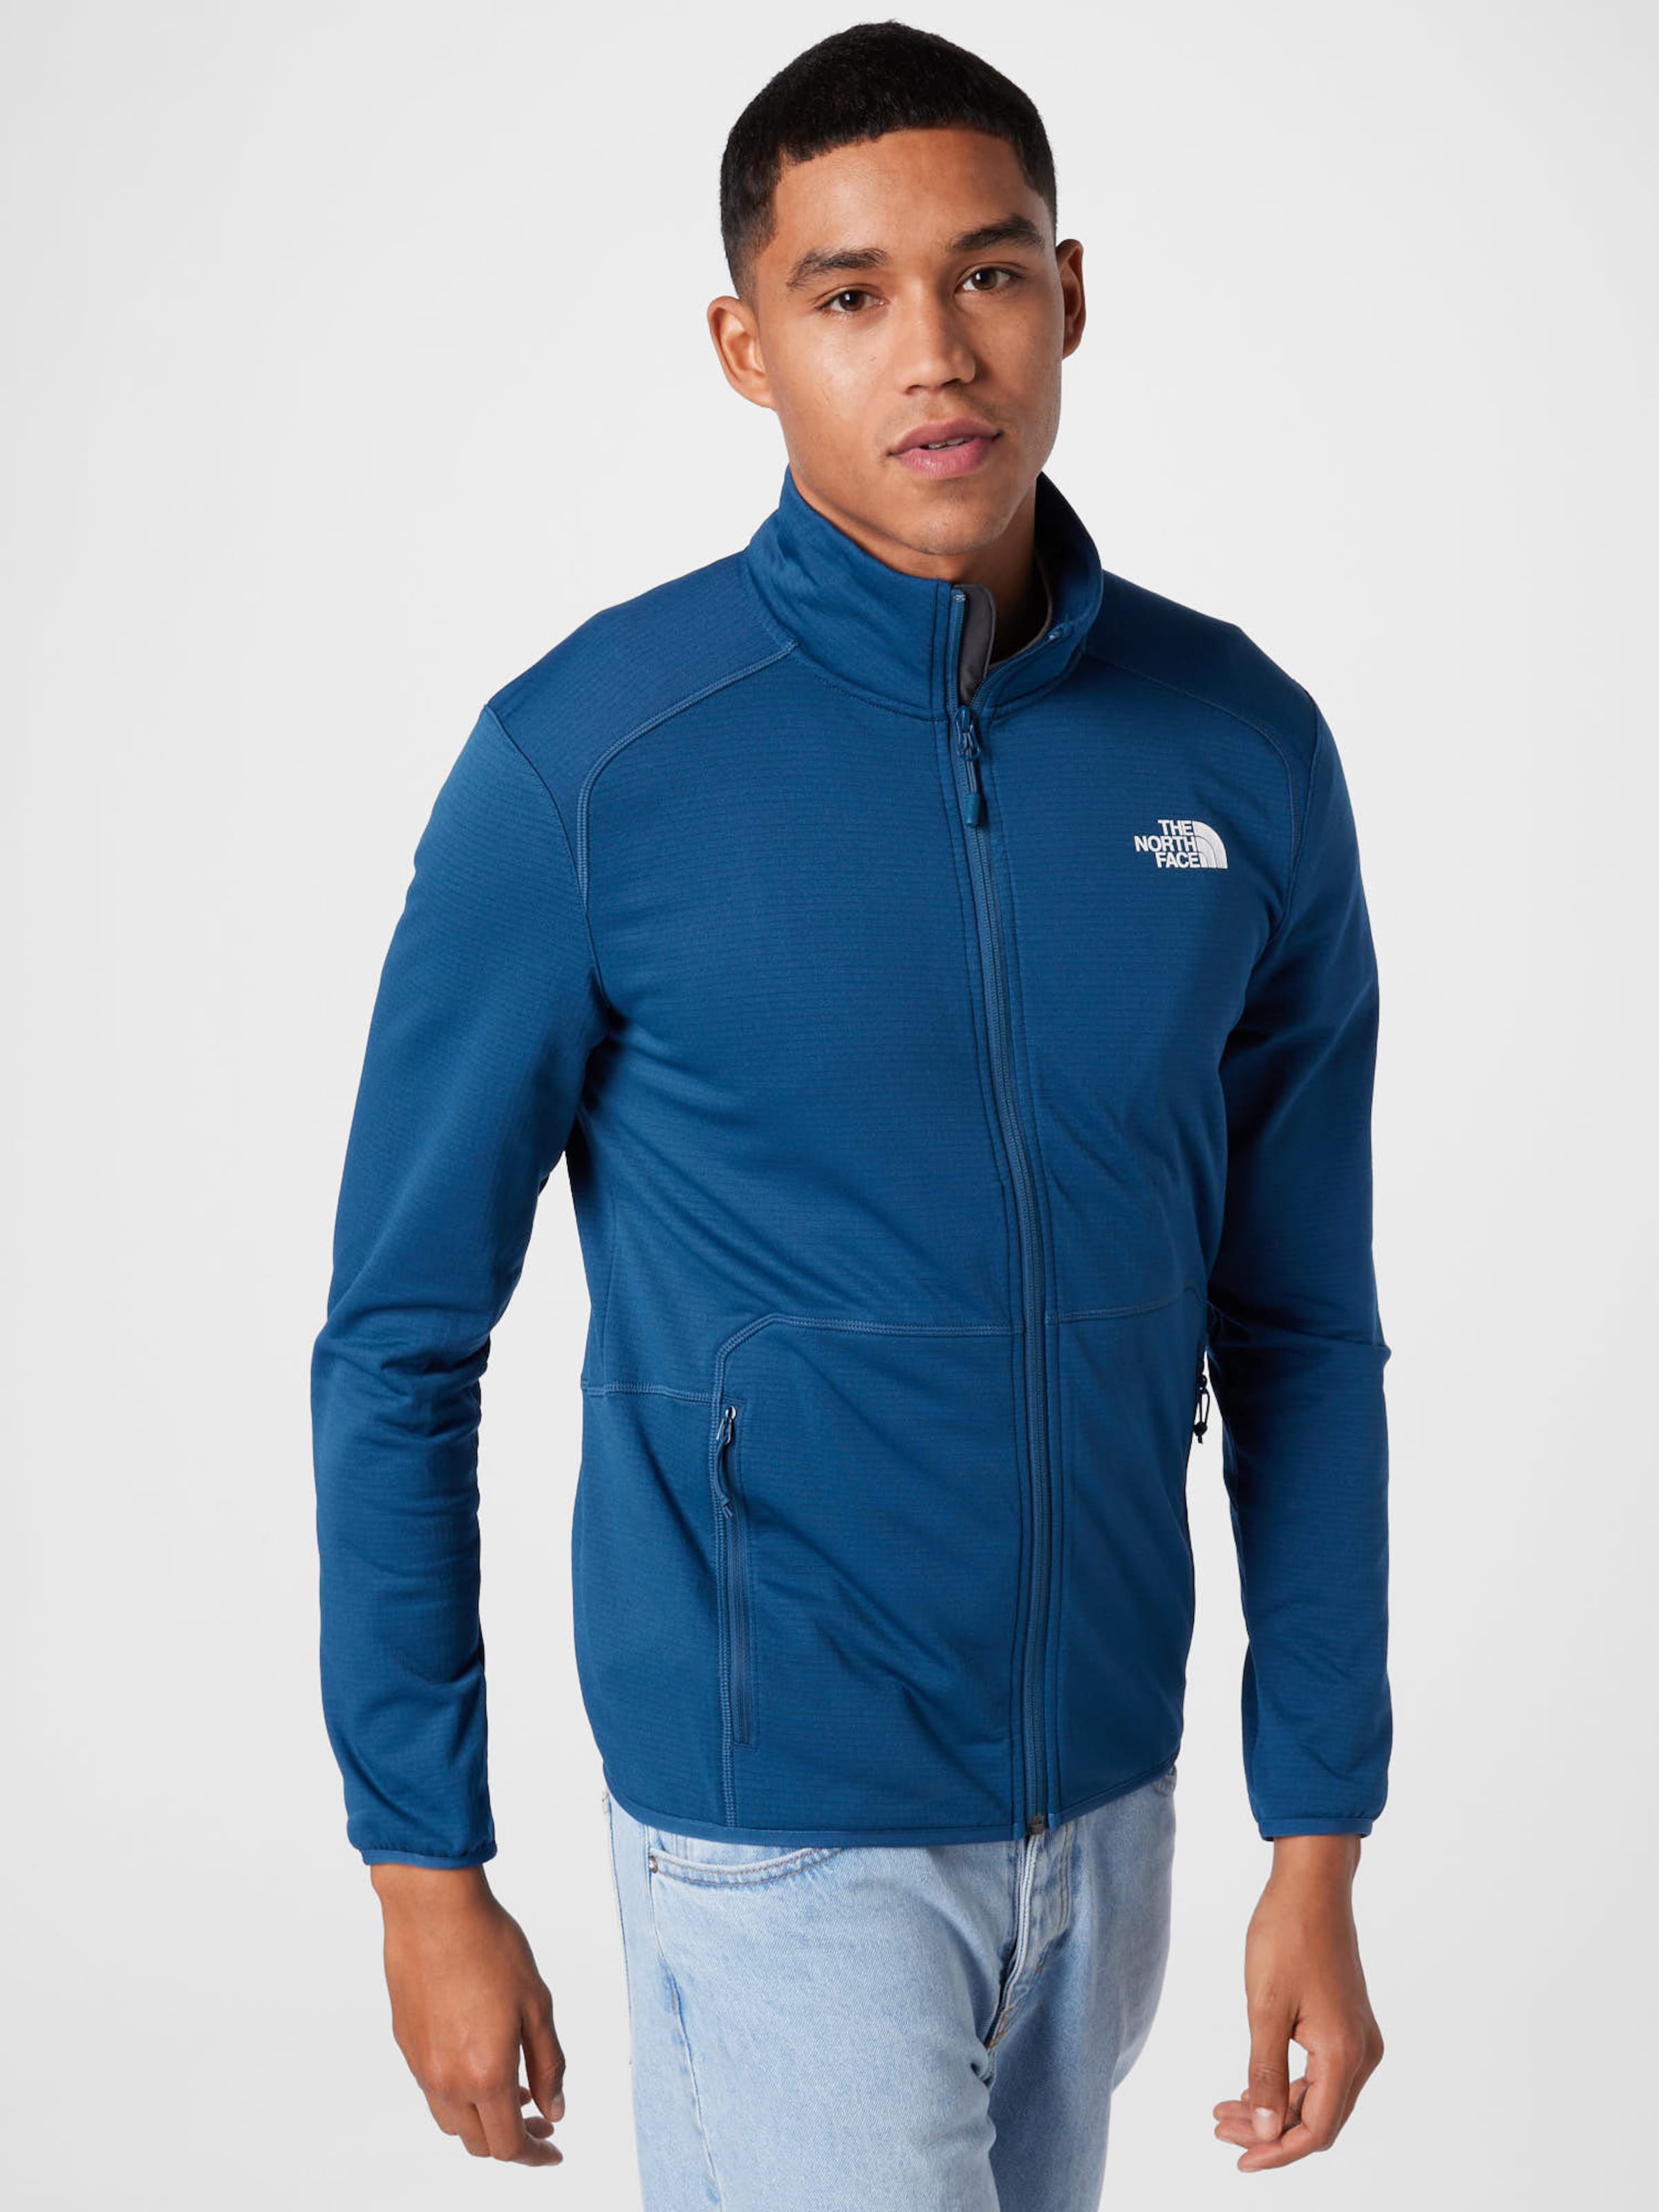 Männer Sportbekleidung THE NORTH FACE Jacke 'Quest' in Blau - GN17076